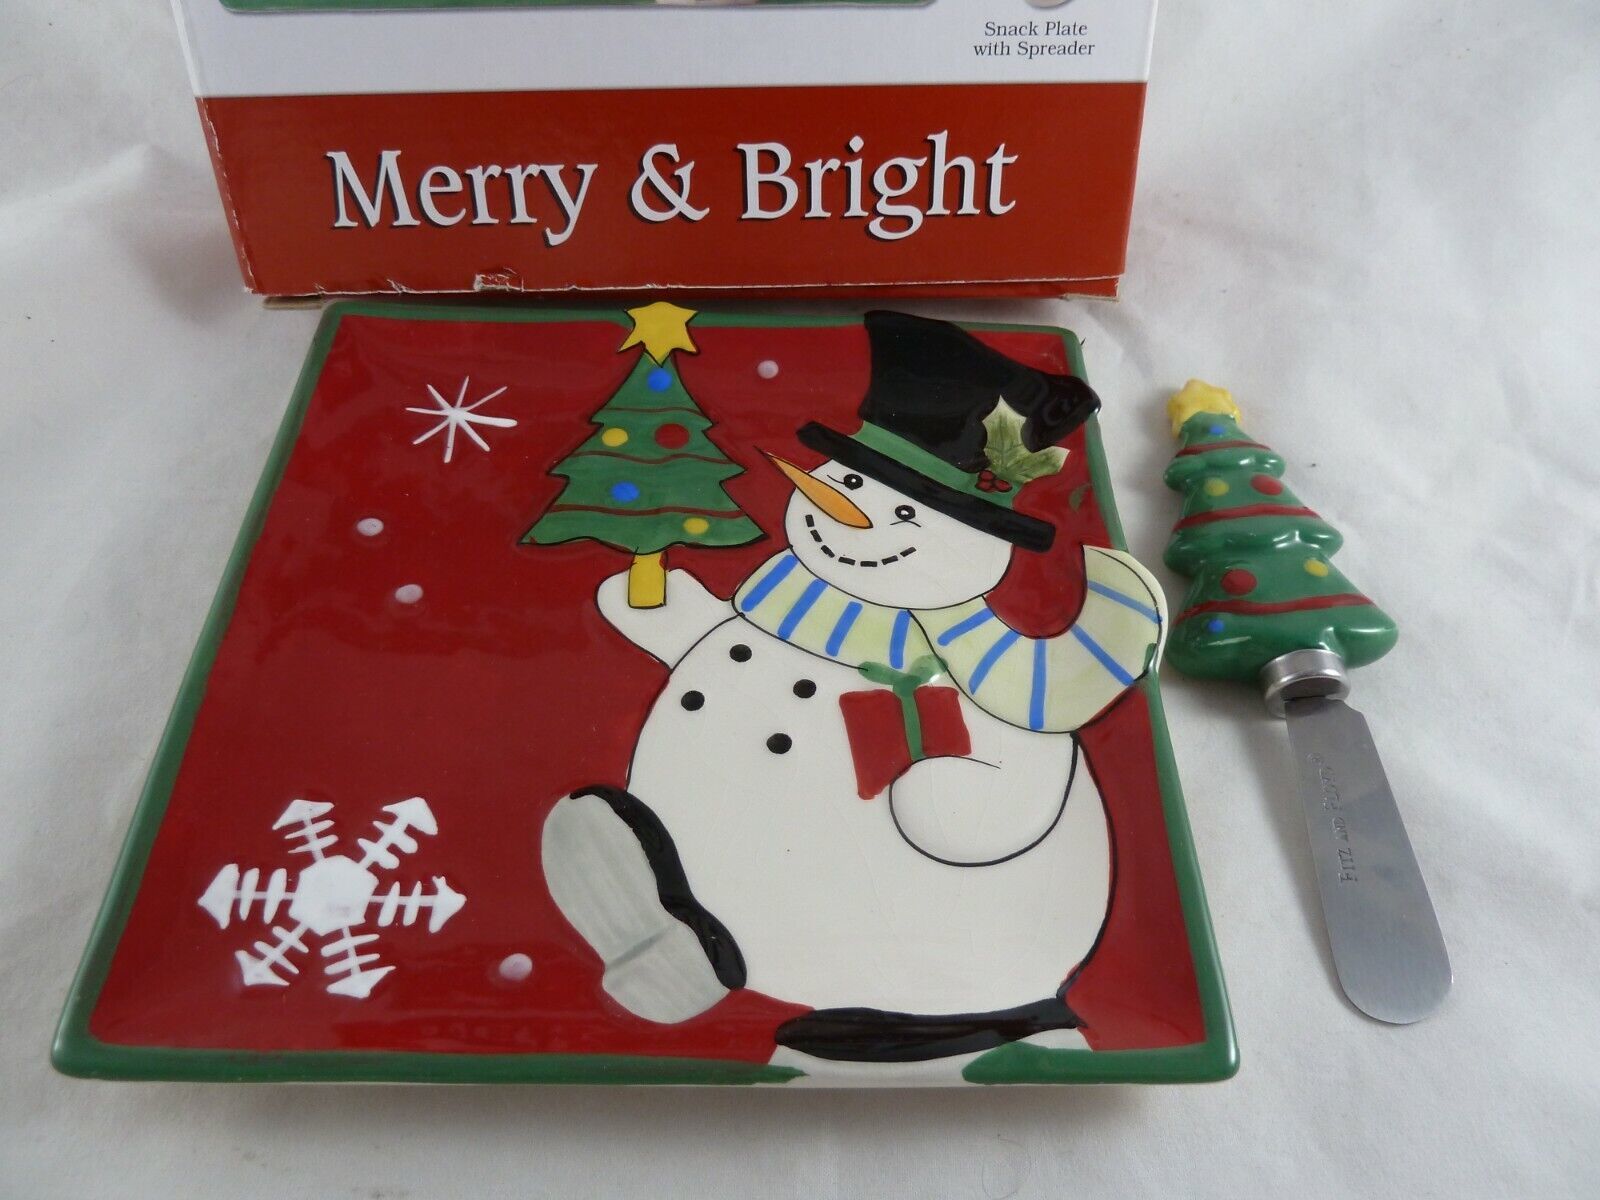 Primary image for Fitz and Floyd Merry & Bright Christmas Snack Plate with Spreader Holiday Cheese